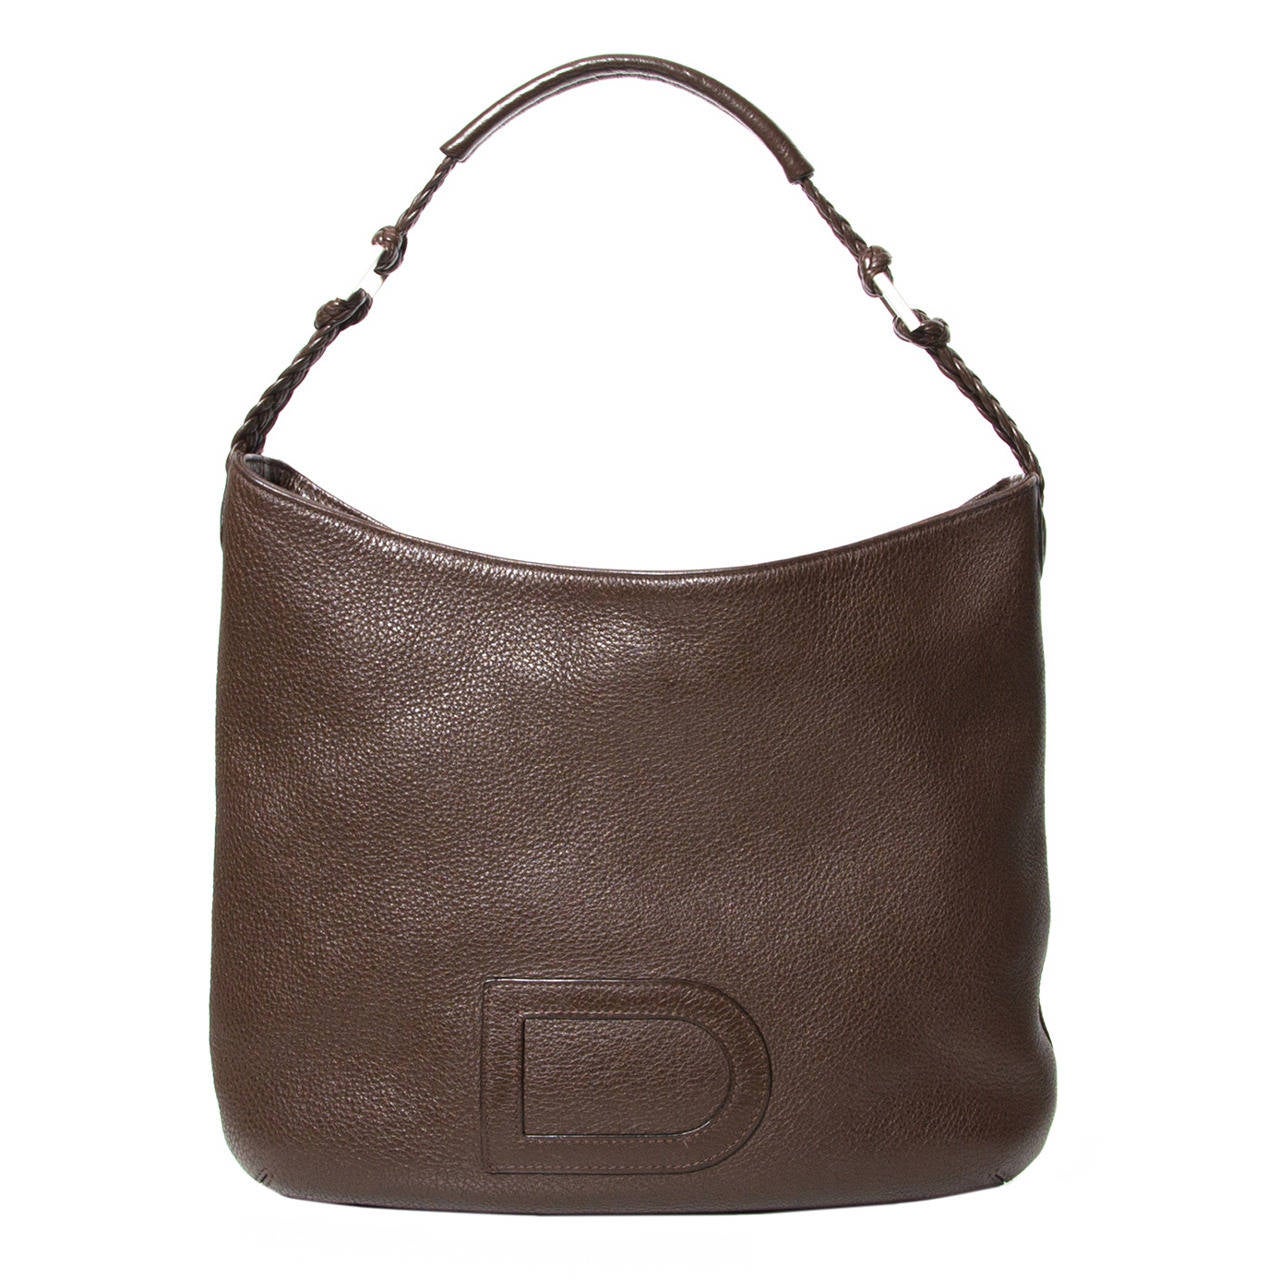 Delvaux Chocolate Le Louise Bag at 1stdibs